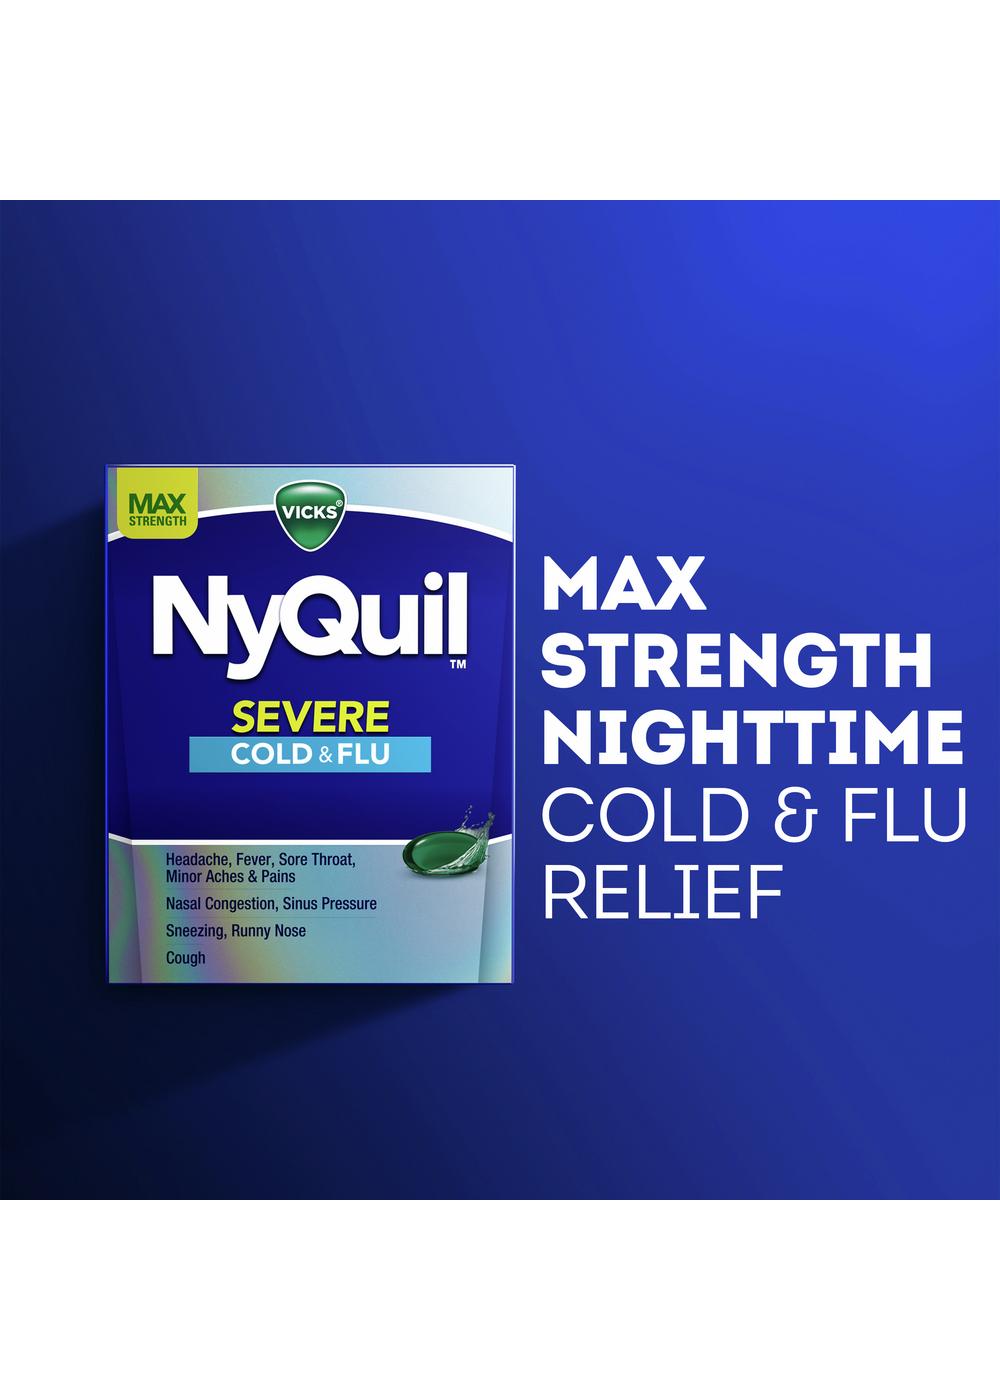 Vicks NyQuil SEVERE Cold & Flu Liquicaps; image 11 of 11